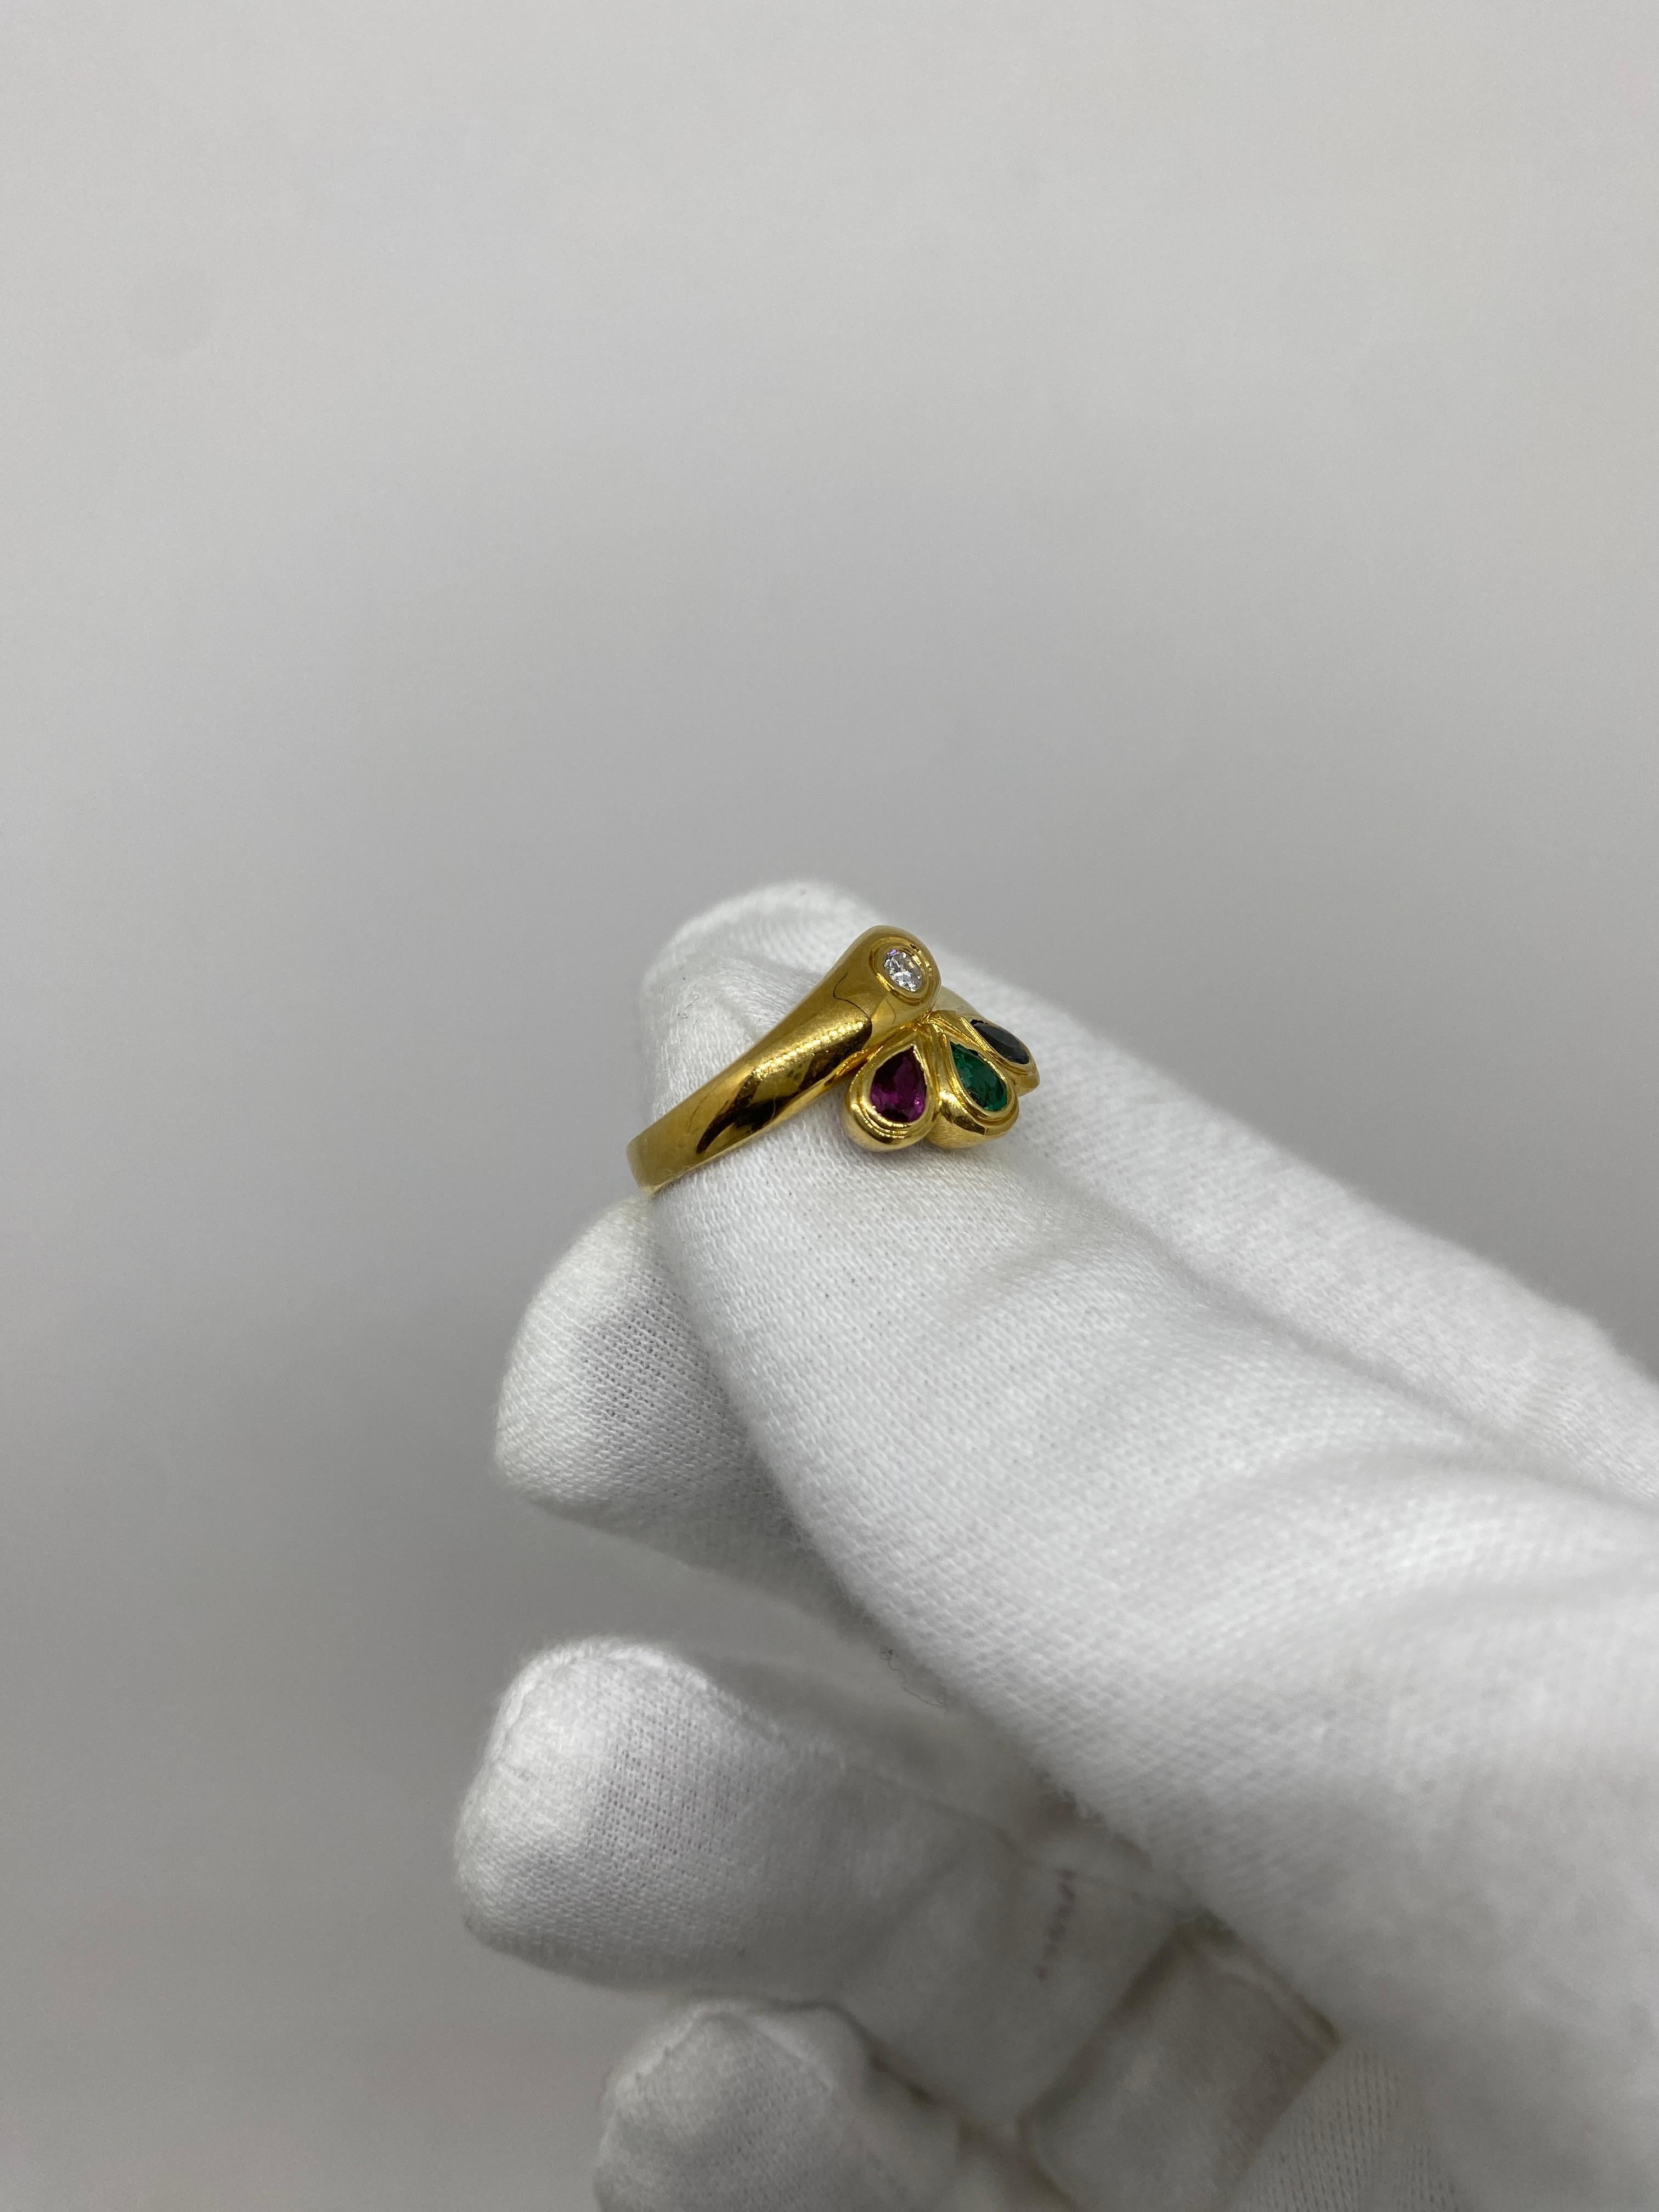 Ring made of 18kt yellow gold with a brilliant-cut diamond and a ruby an emerald and a drop-cut sapphire

Welcome to our jewelry collection, where every piece tells a story of timeless elegance and unparalleled craftsmanship. As a family-run